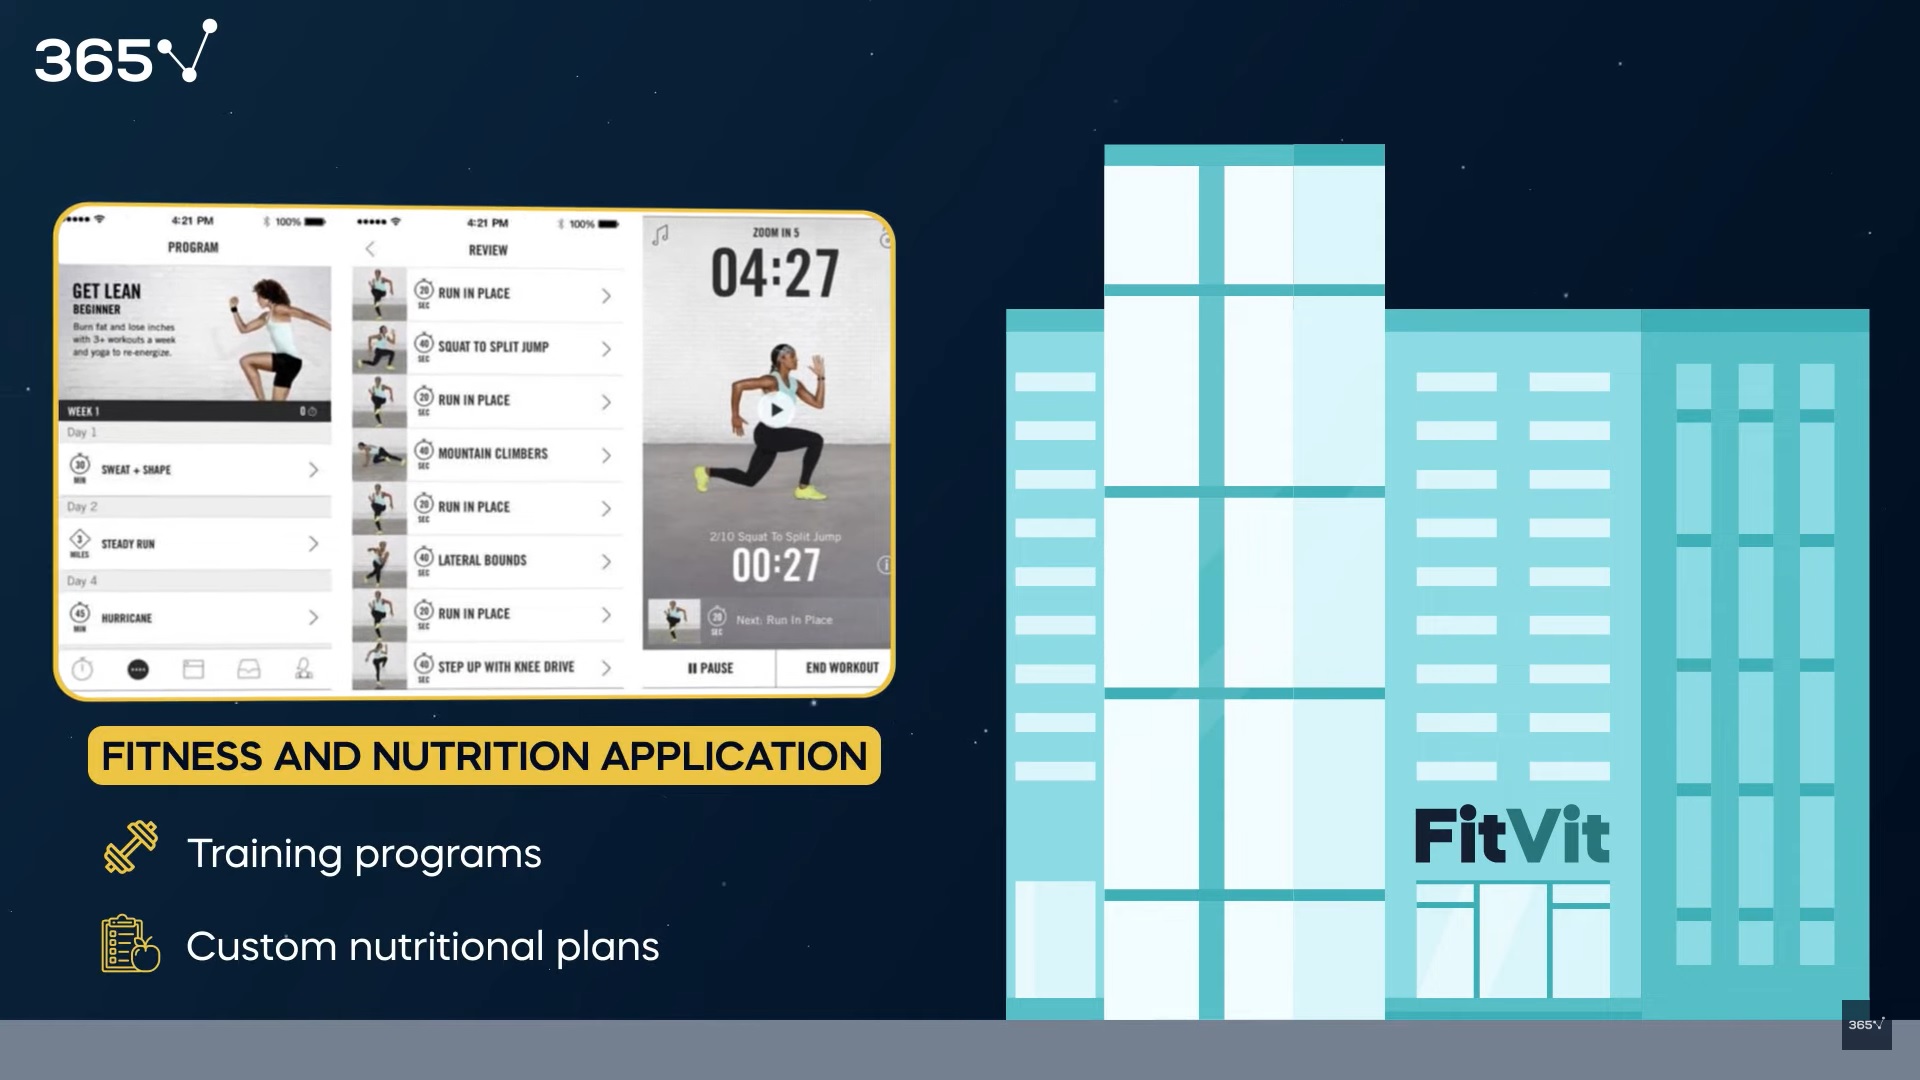 Animated building of a health app startup called FitVit. On the left side, there is a screenshot of their app, showing the different types of workouts available.